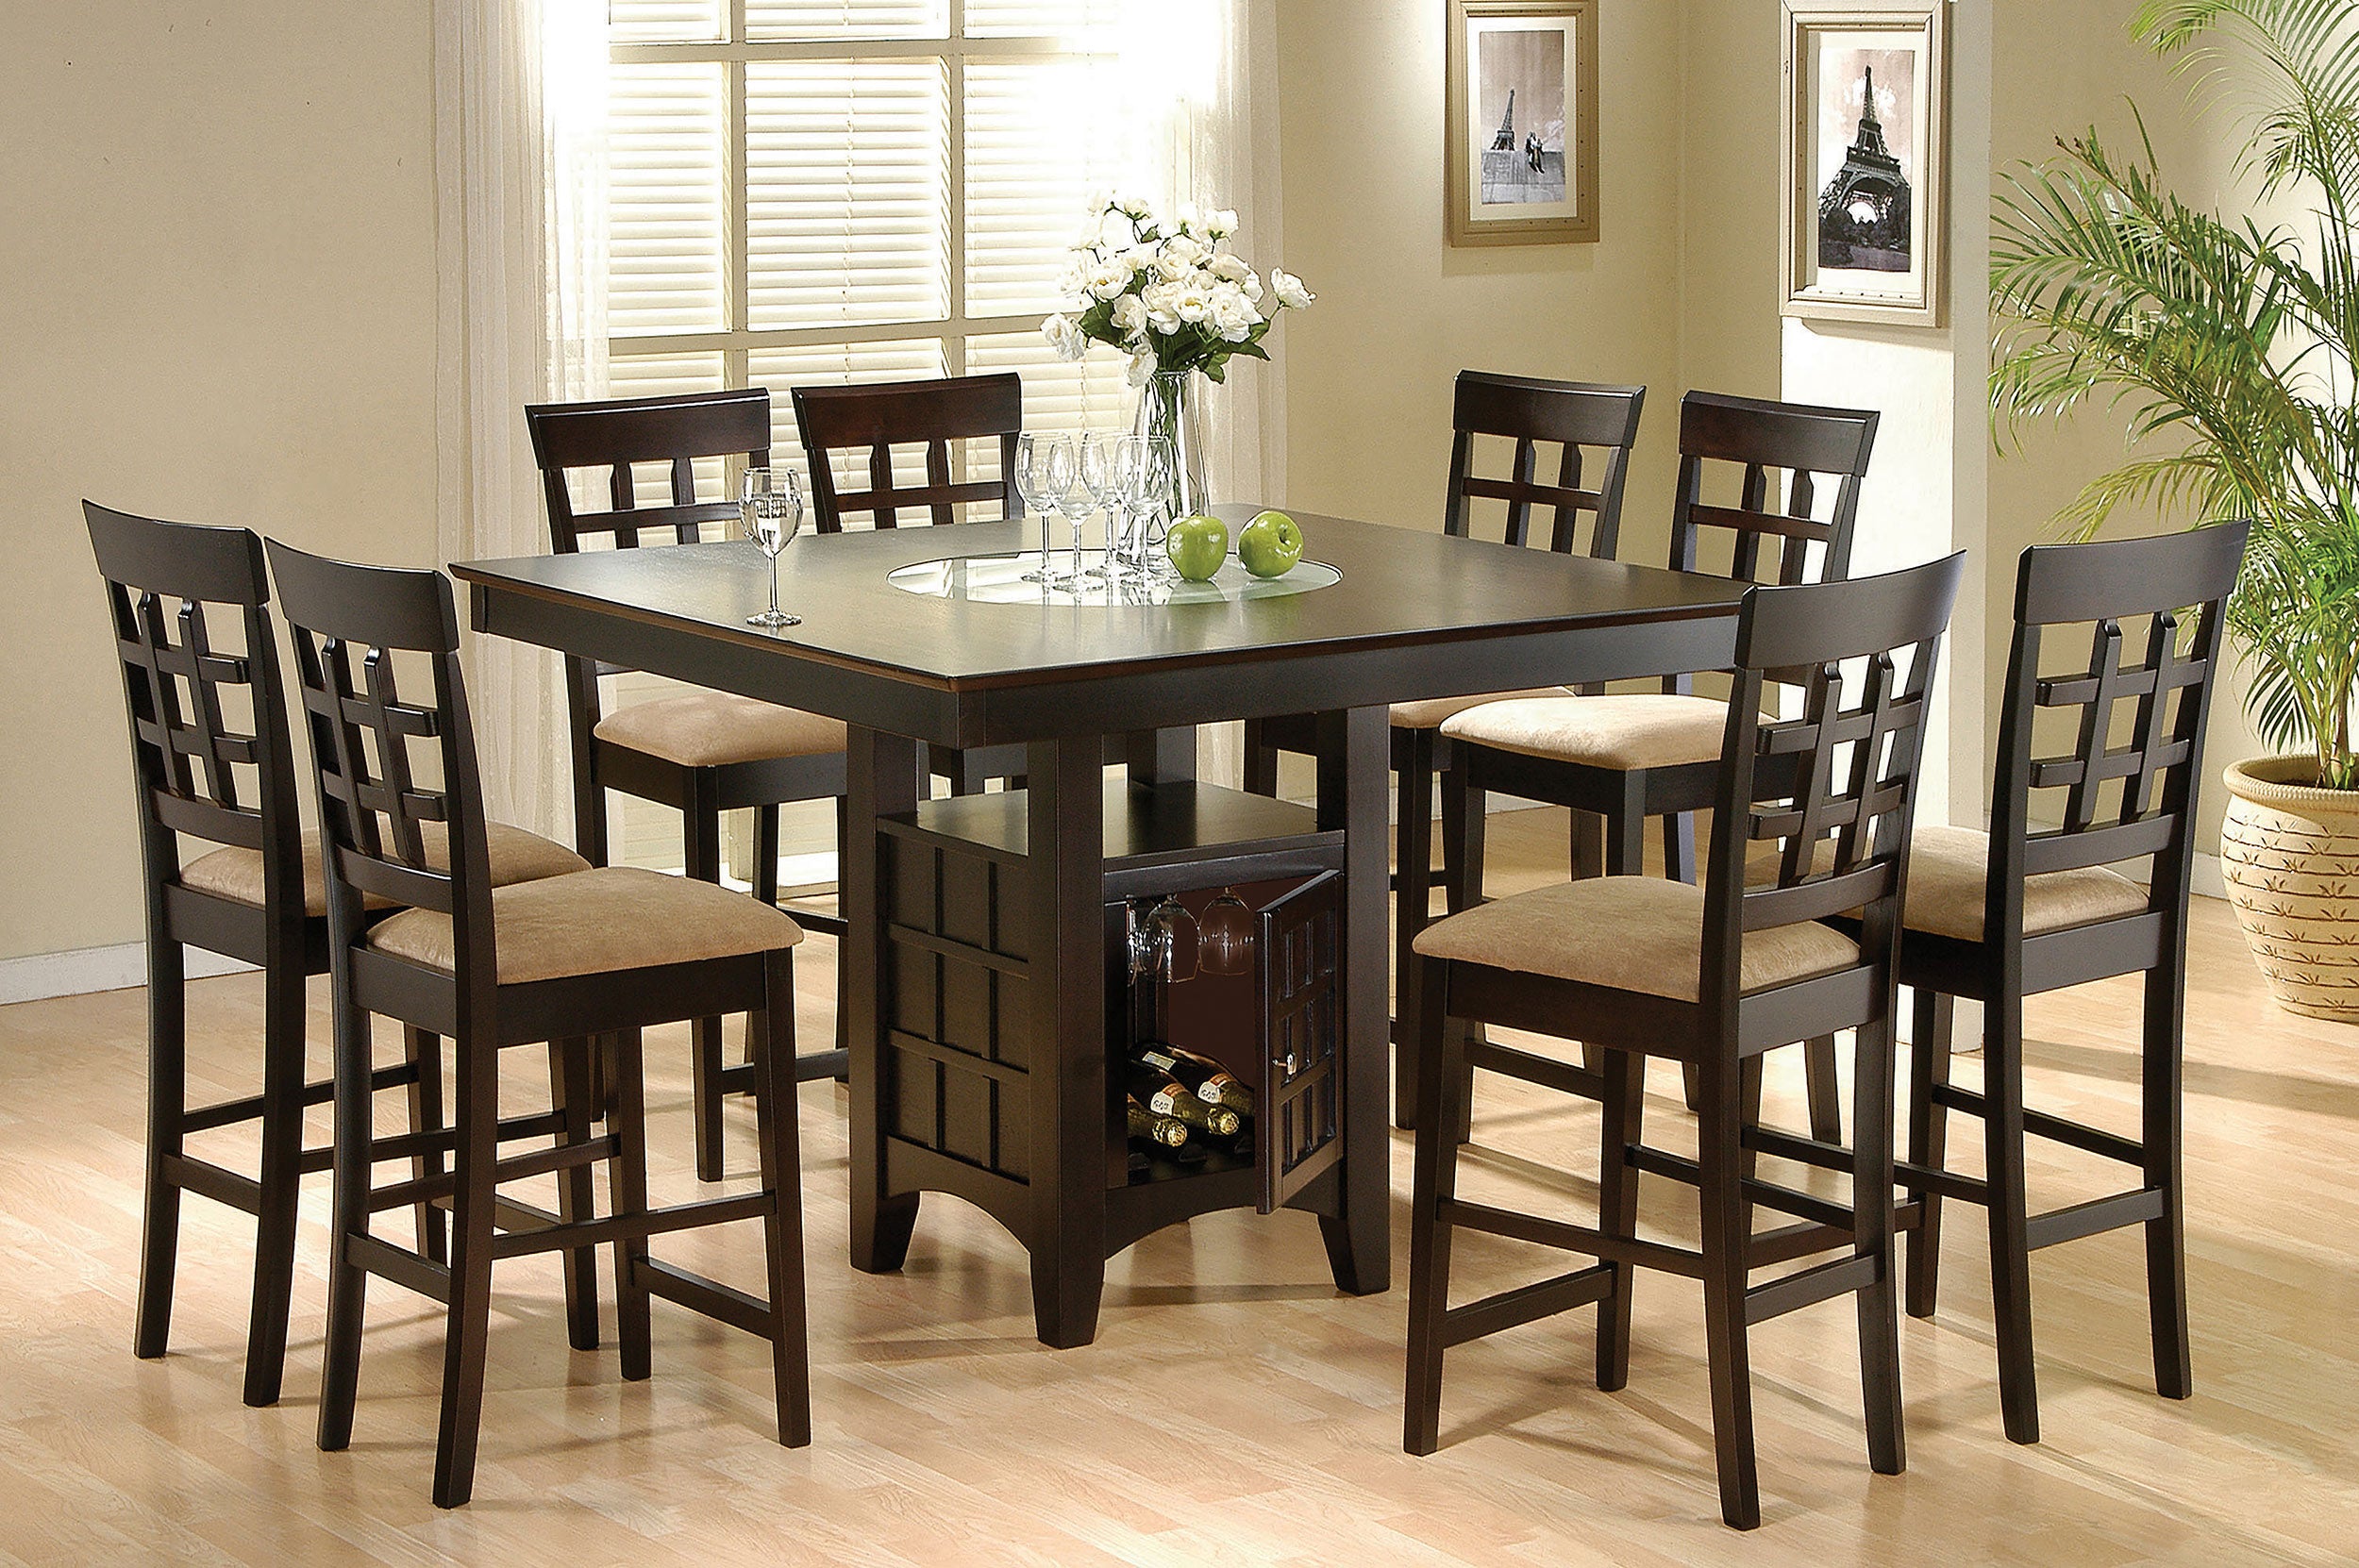 9 PC Square Gabriel Storage Counter Height Dining Room Table and stool Set